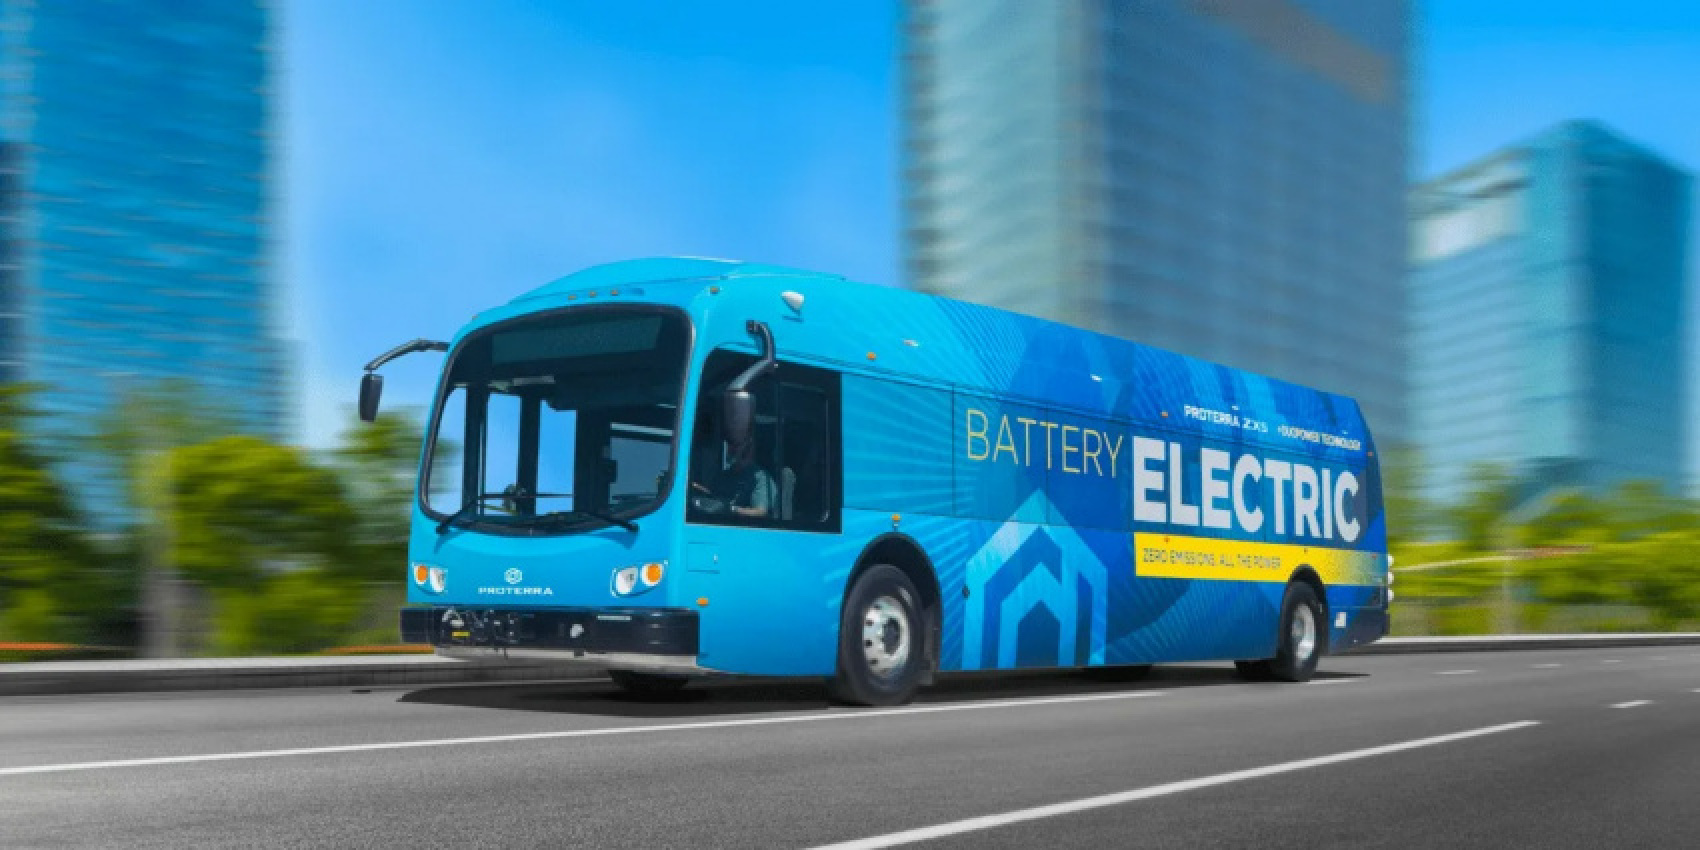 autos, cars, automotive industry, car, cars, driven, driven nz, electric cars, green, motoring, new zealand, news, nz, this electric bus has enormous 738 kwh battery, traffic, transport, this electric bus has an enormous 738 kwh battery